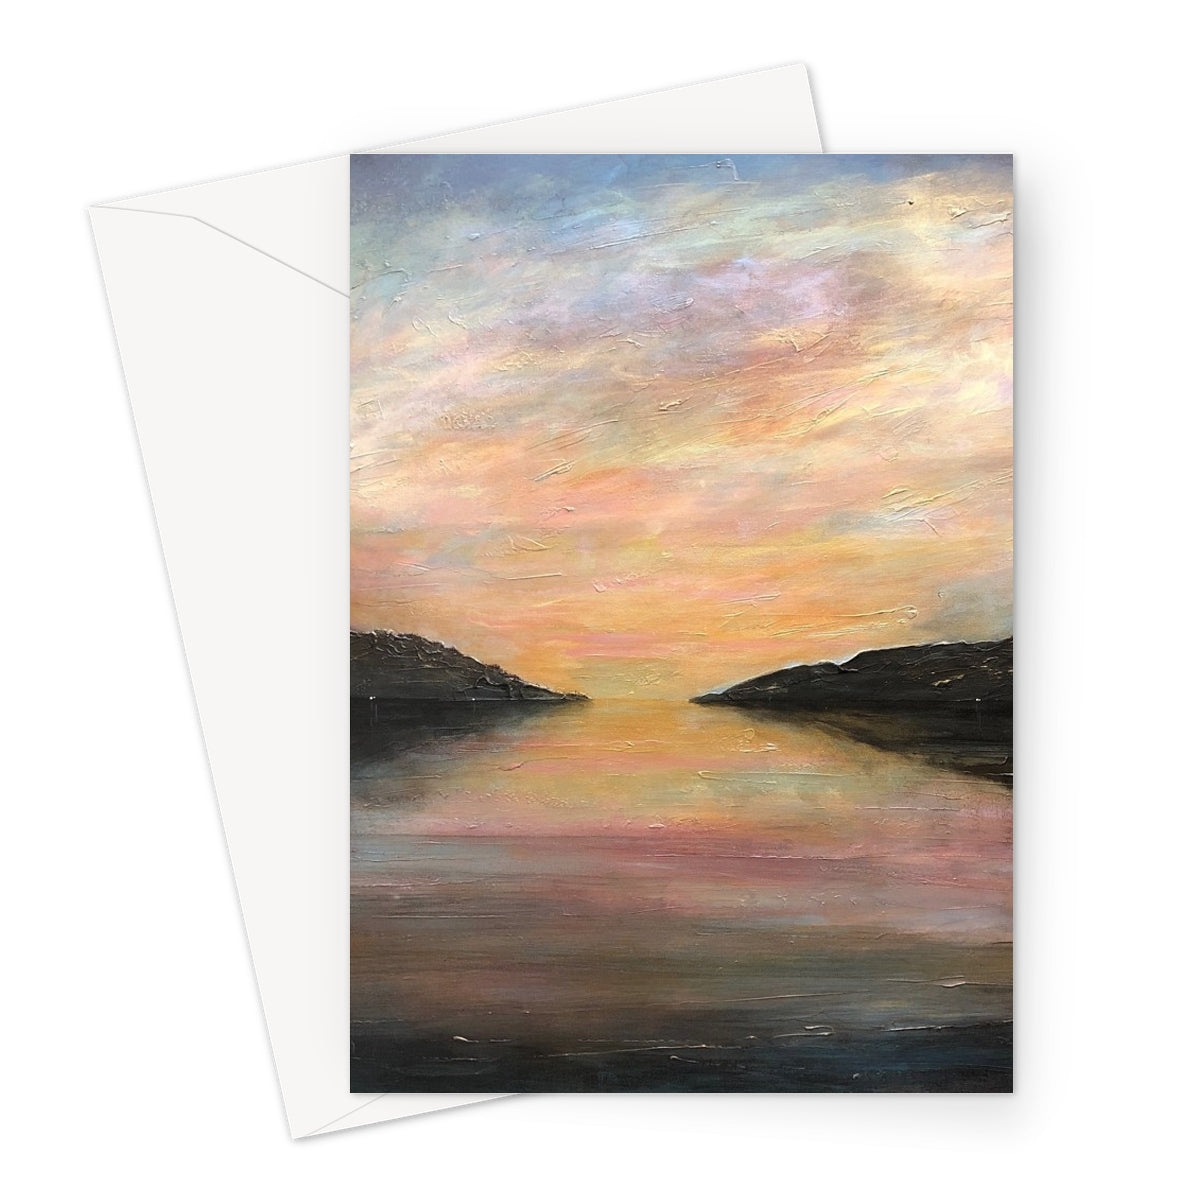 Loch Ness Glow Art Gifts Greeting Card-Stationery-Scottish Lochs & Mountains Art Gallery-A5 Portrait-1 Card-Paintings, Prints, Homeware, Art Gifts From Scotland By Scottish Artist Kevin Hunter